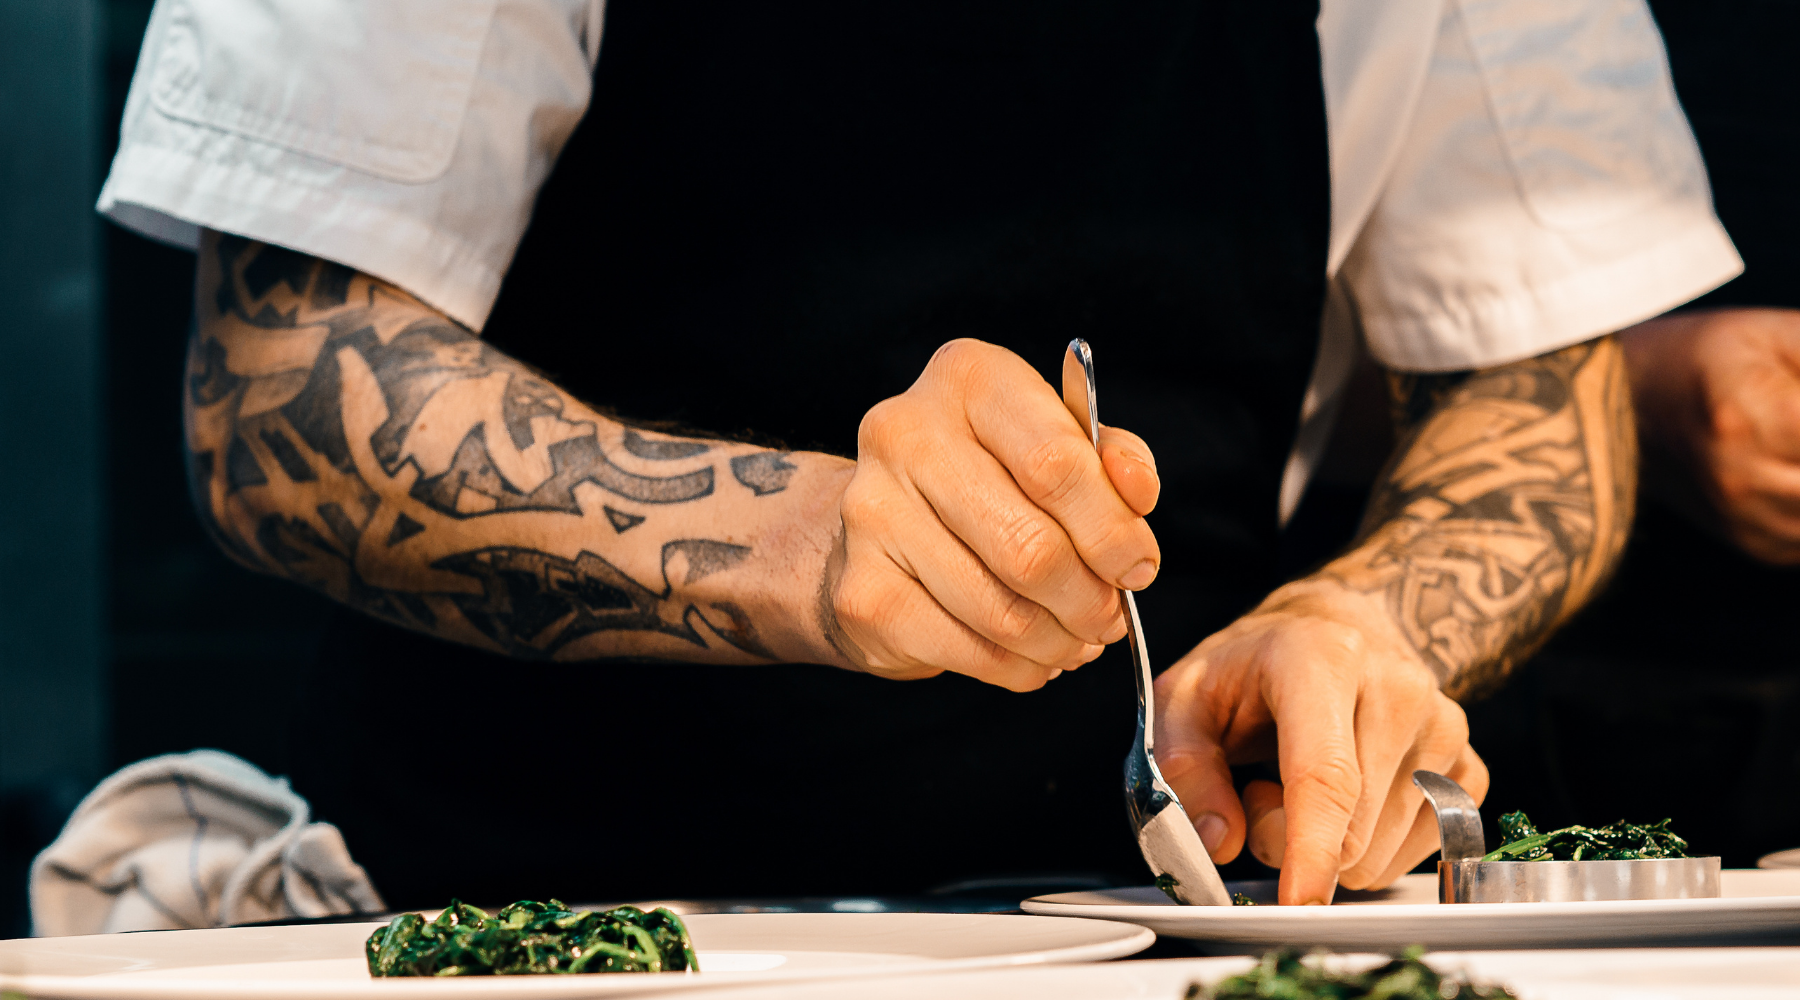 5 Tips From a Pinterest-Educated Chef